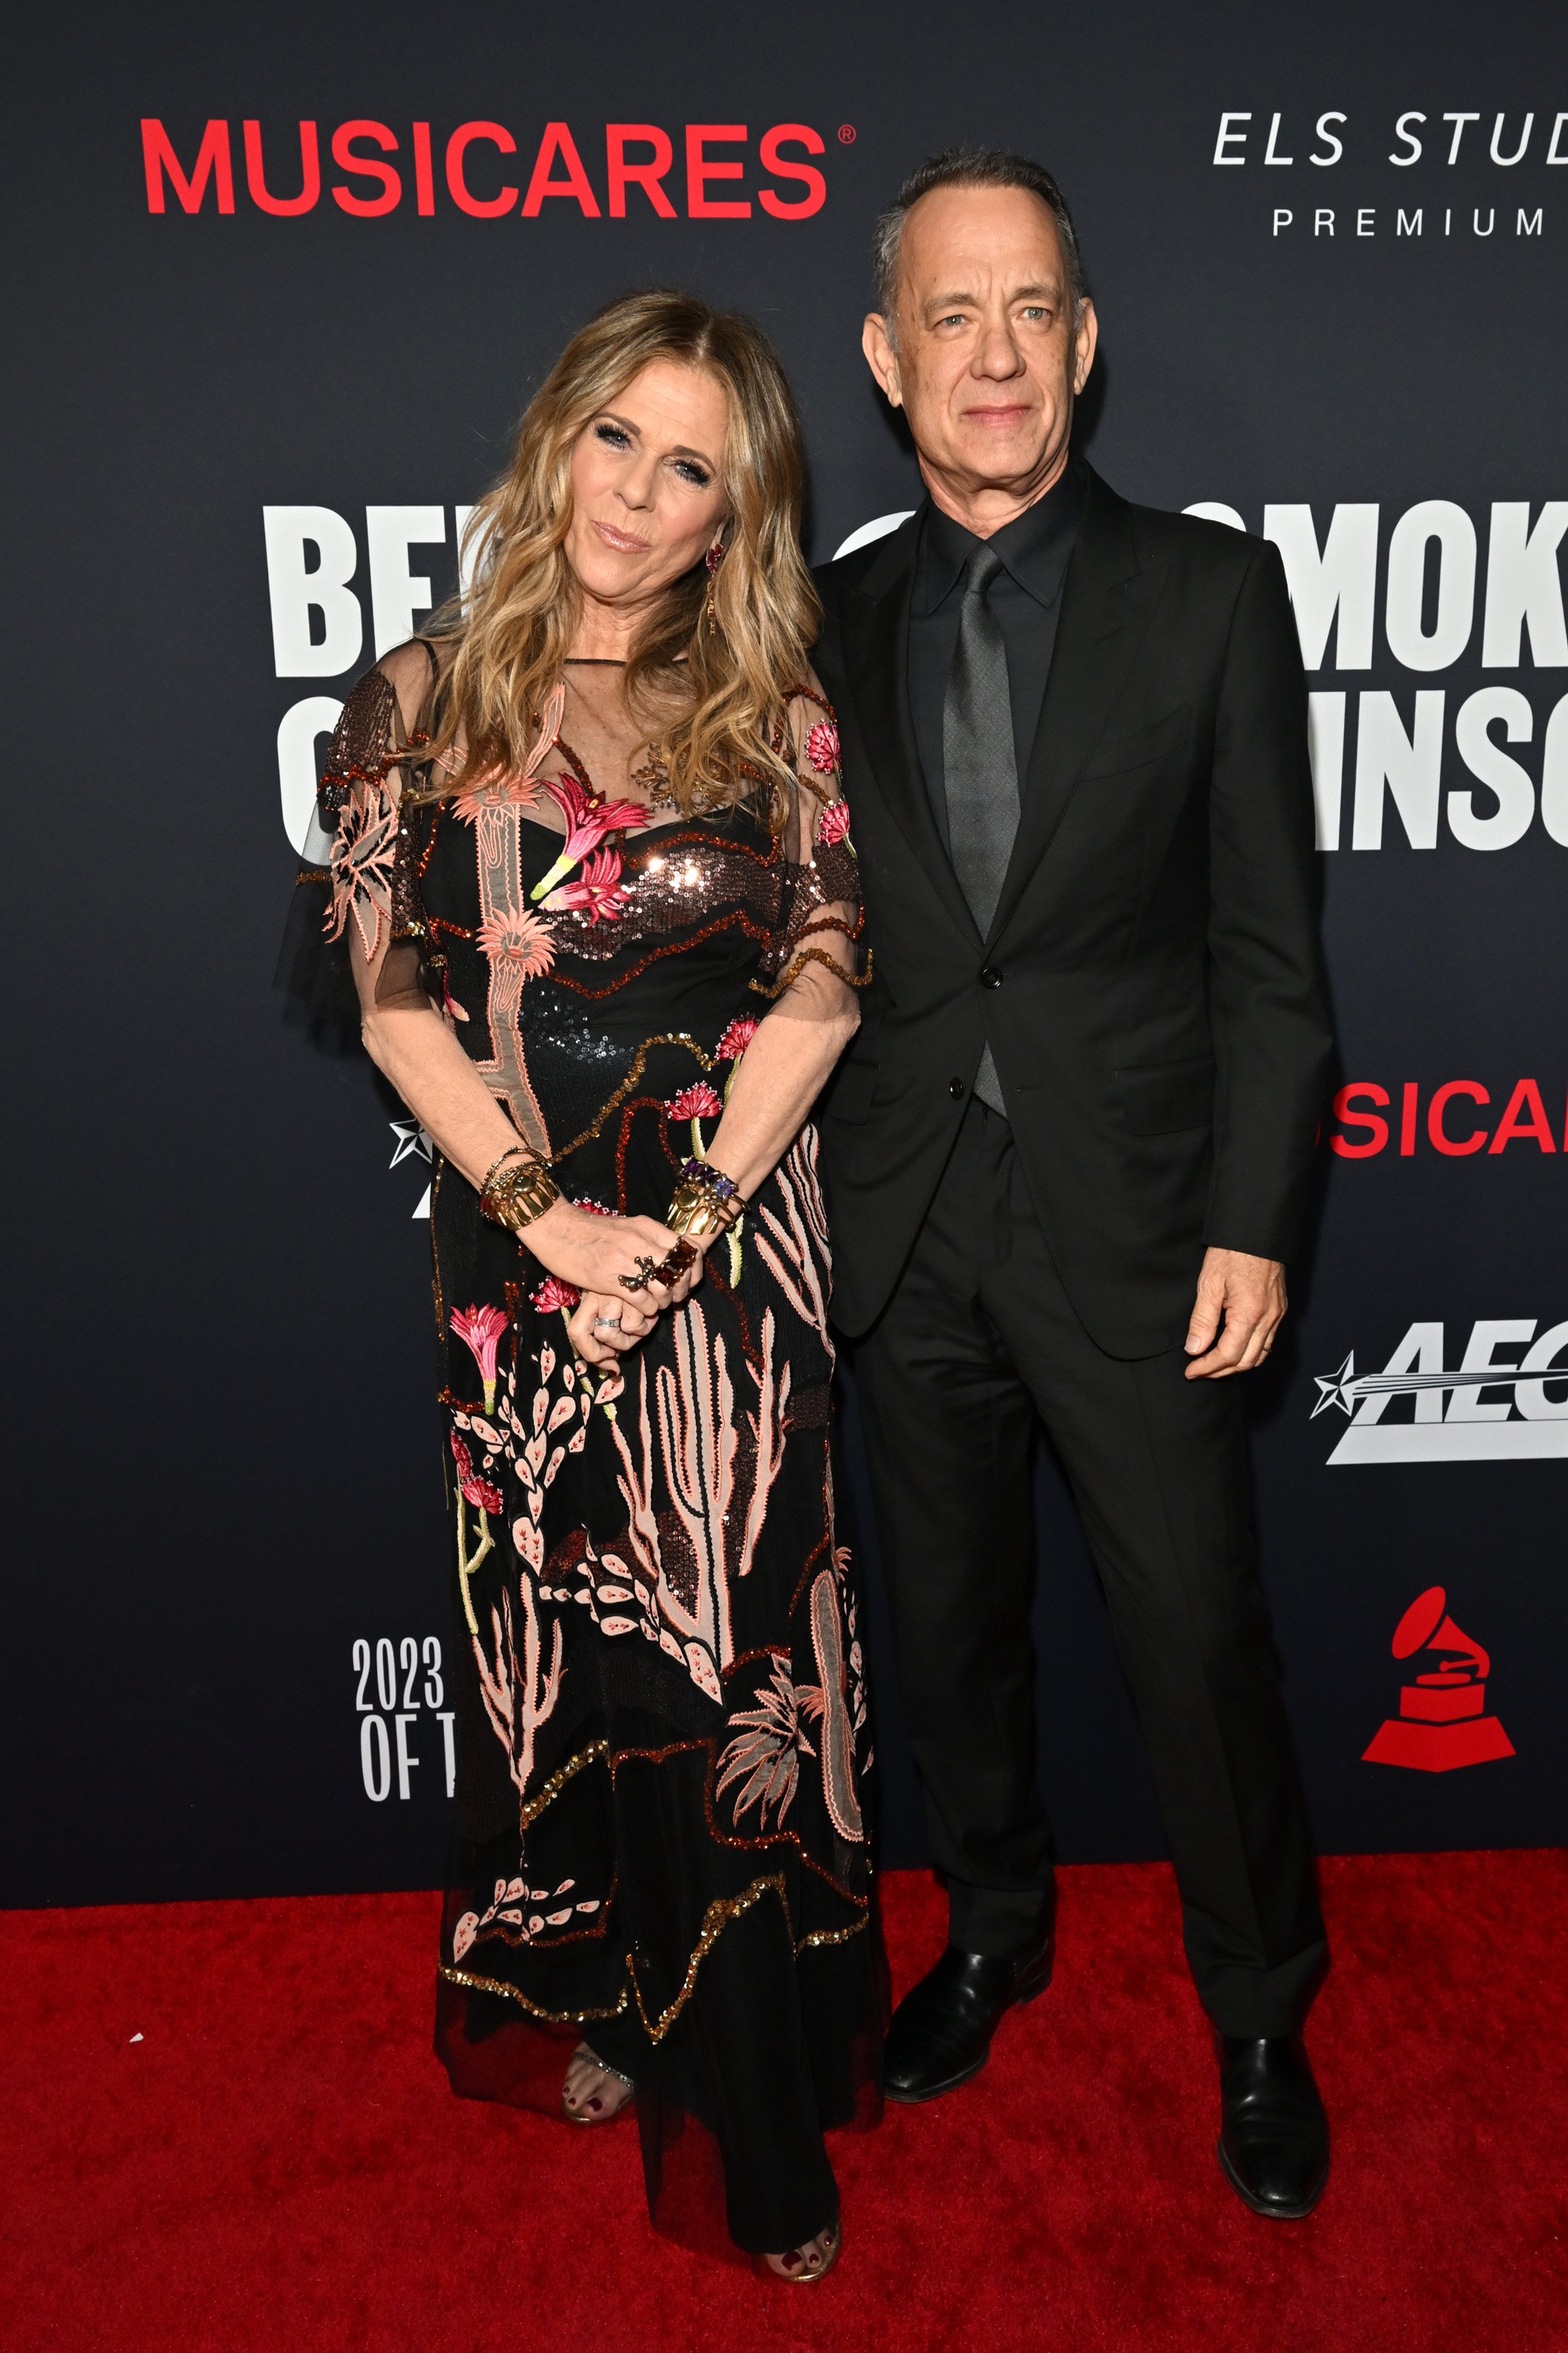  LOS ANGELES, CALIFORNIA - FEBRUARY 03: (L-R) Rita Wilson and Tom Hanks attend MusiCares Persons of the Year Honoring Berry Gordy and Smokey Robinson at Los Angeles Convention Center on February 03, 2023 in Los Angeles, California. (Photo by Lester C